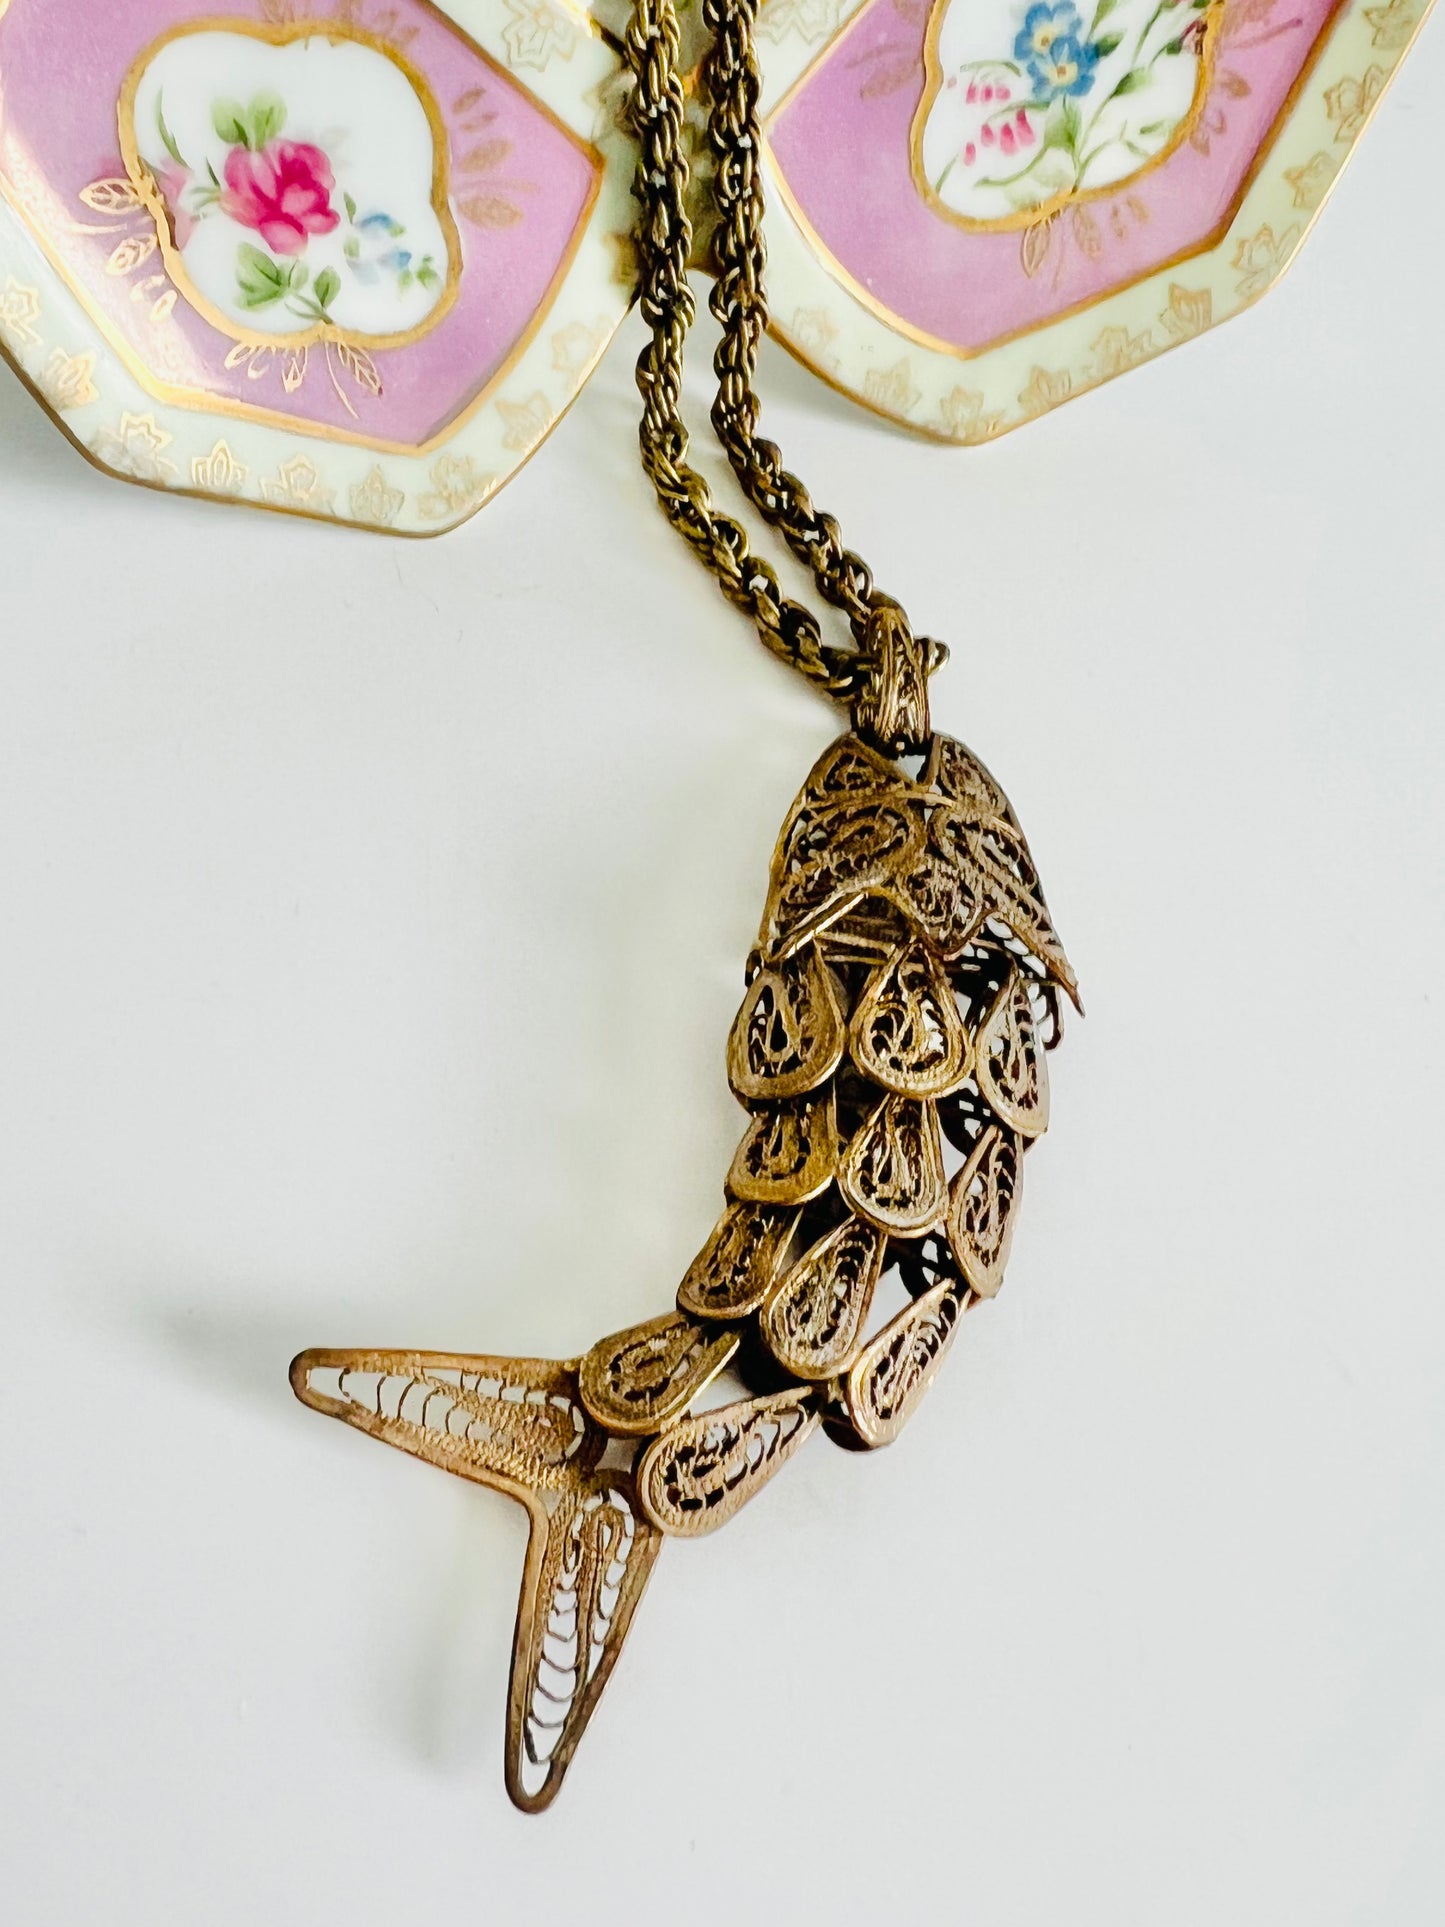 Large Vintage 1960s Brass Filigree Articulated Fish Necklace